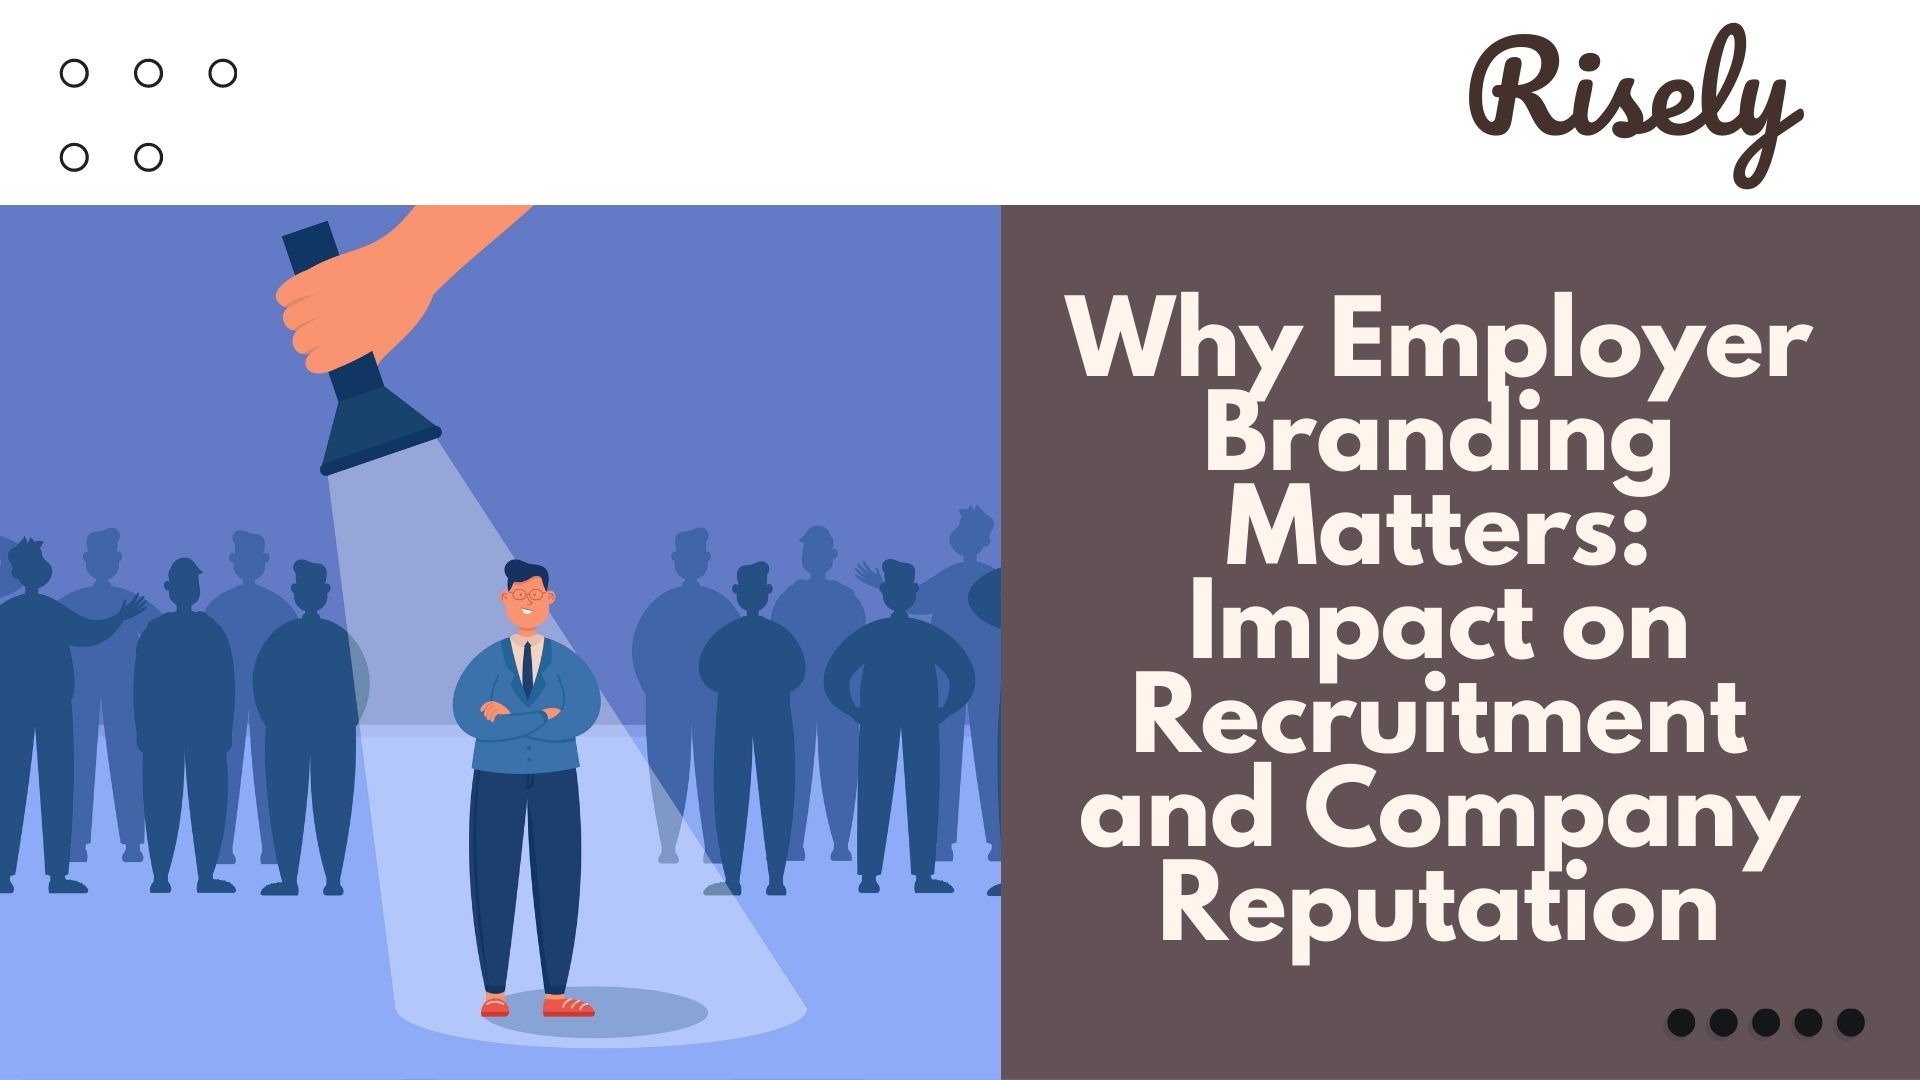 Why Employer Branding Matters: Impact on Recruitment and Company Reputation